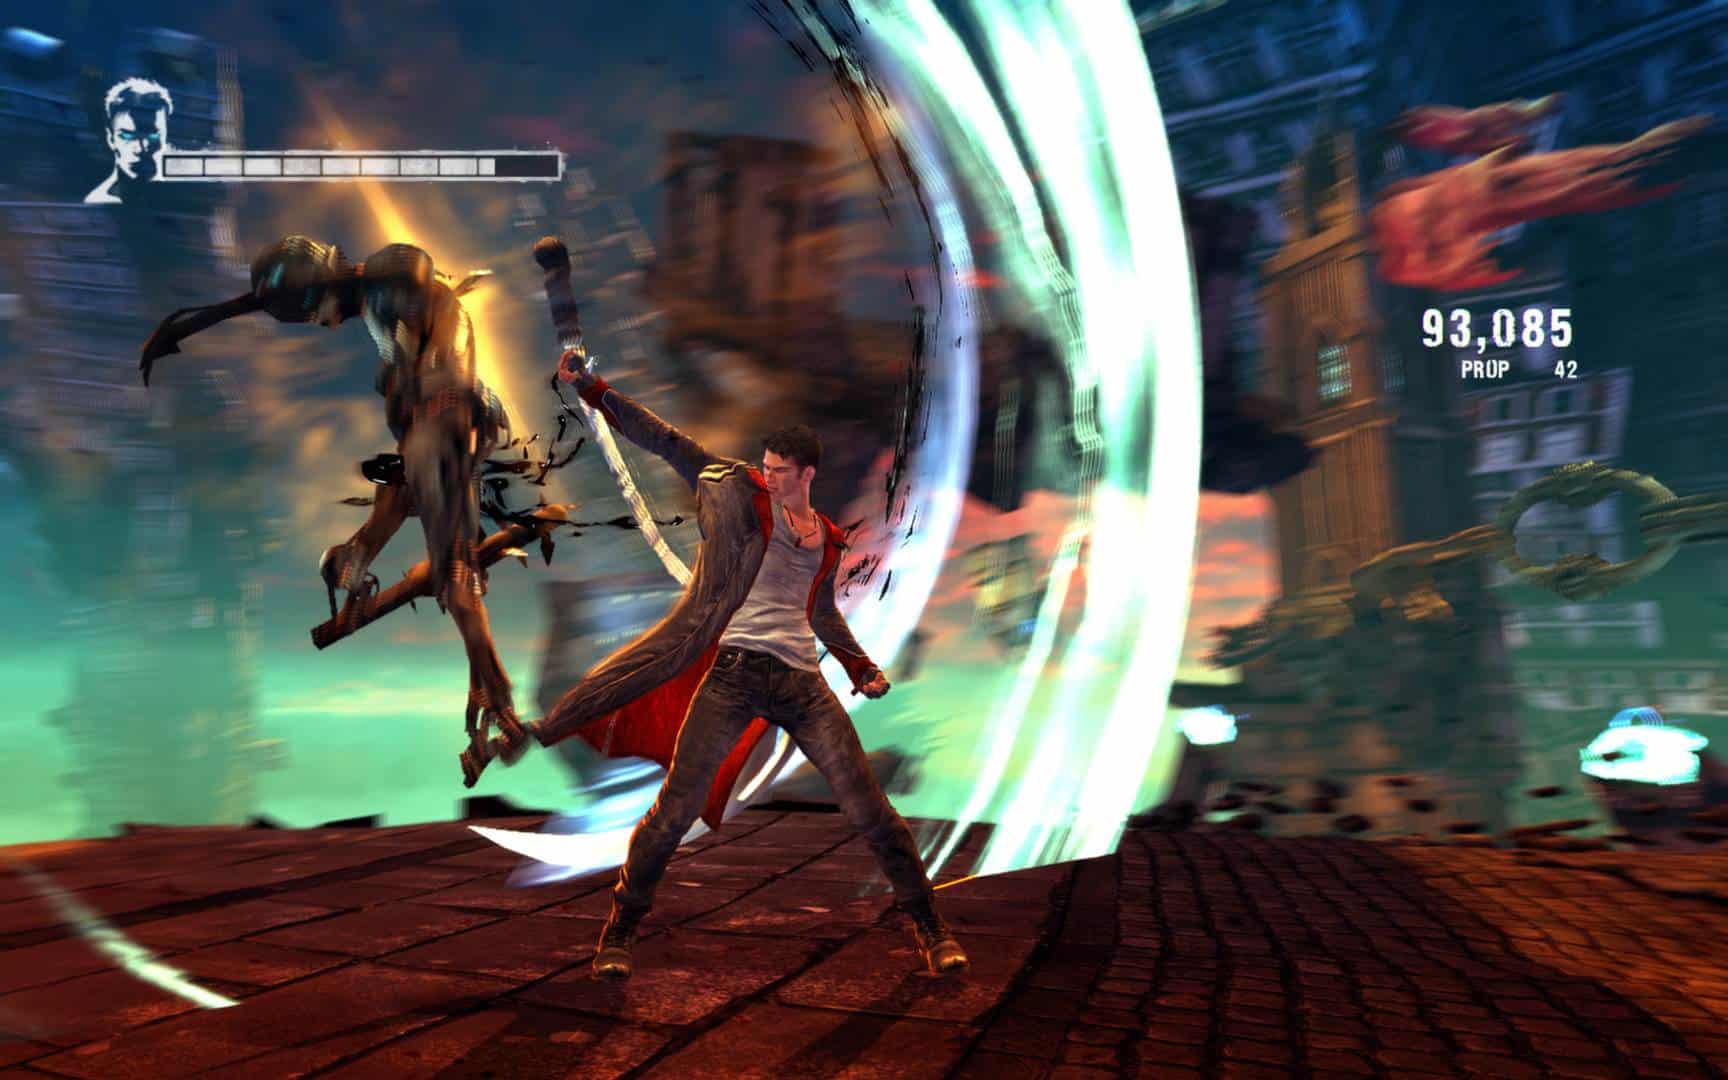 devil may cry 2 pc tpb torrents